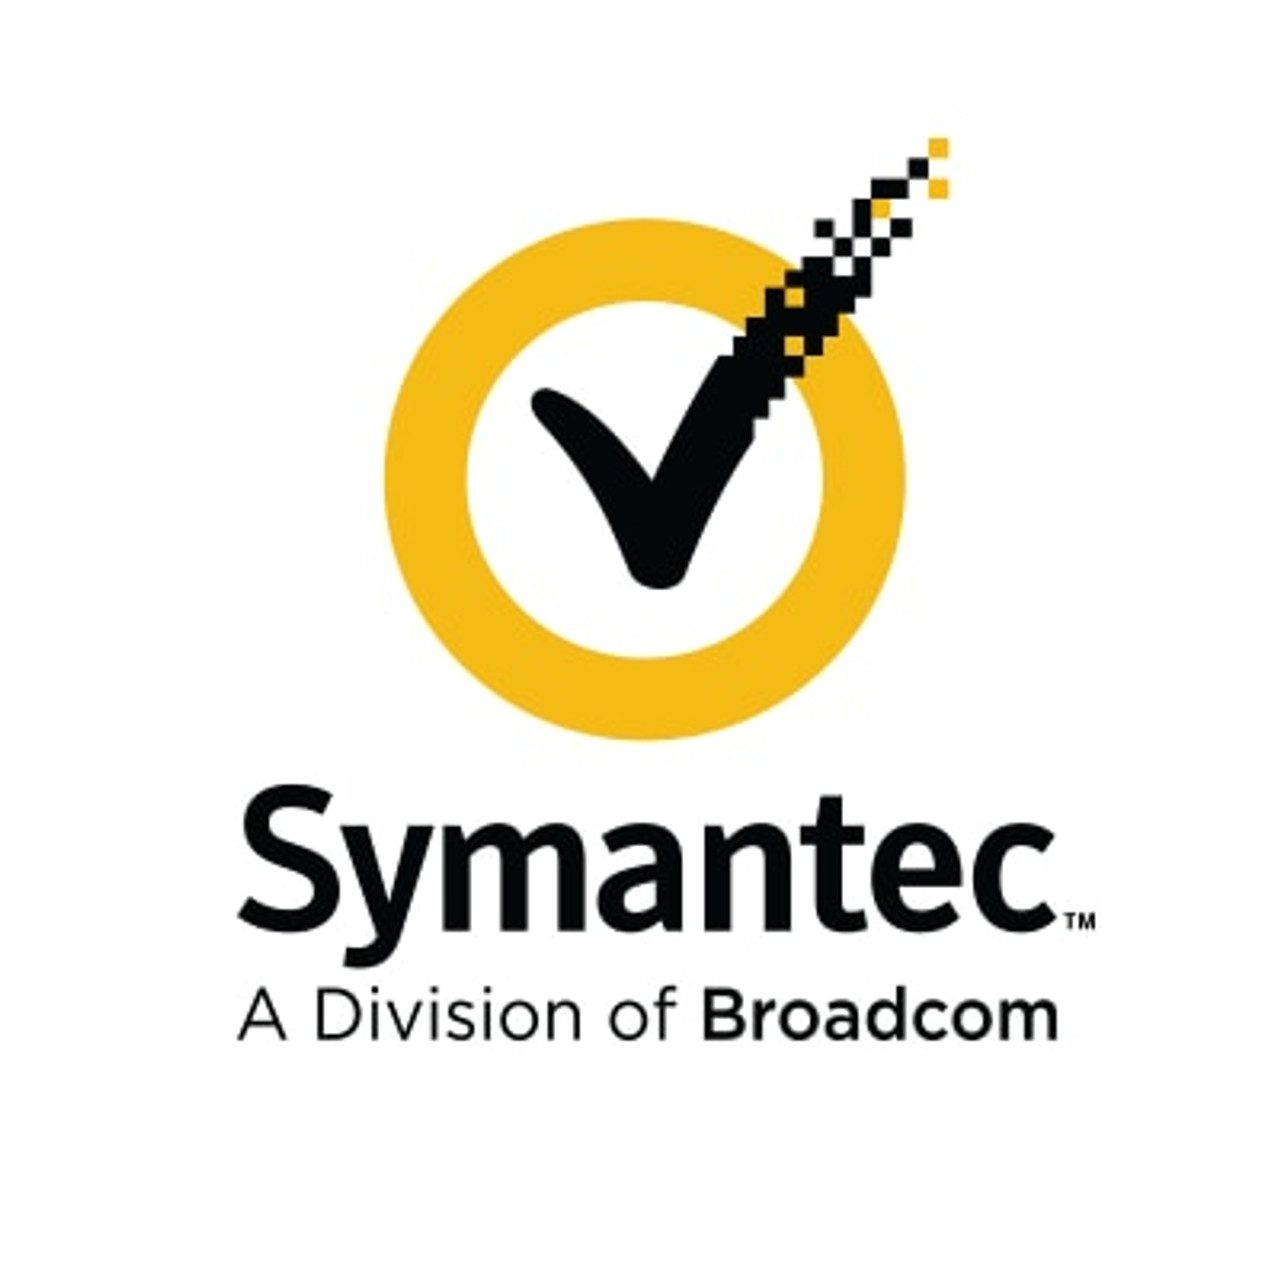 Symantec Advanced Endpoint Defense (without SEP), Additional Quantity Hybrid Subscription License with Support, 50-99 Devices 1 YR